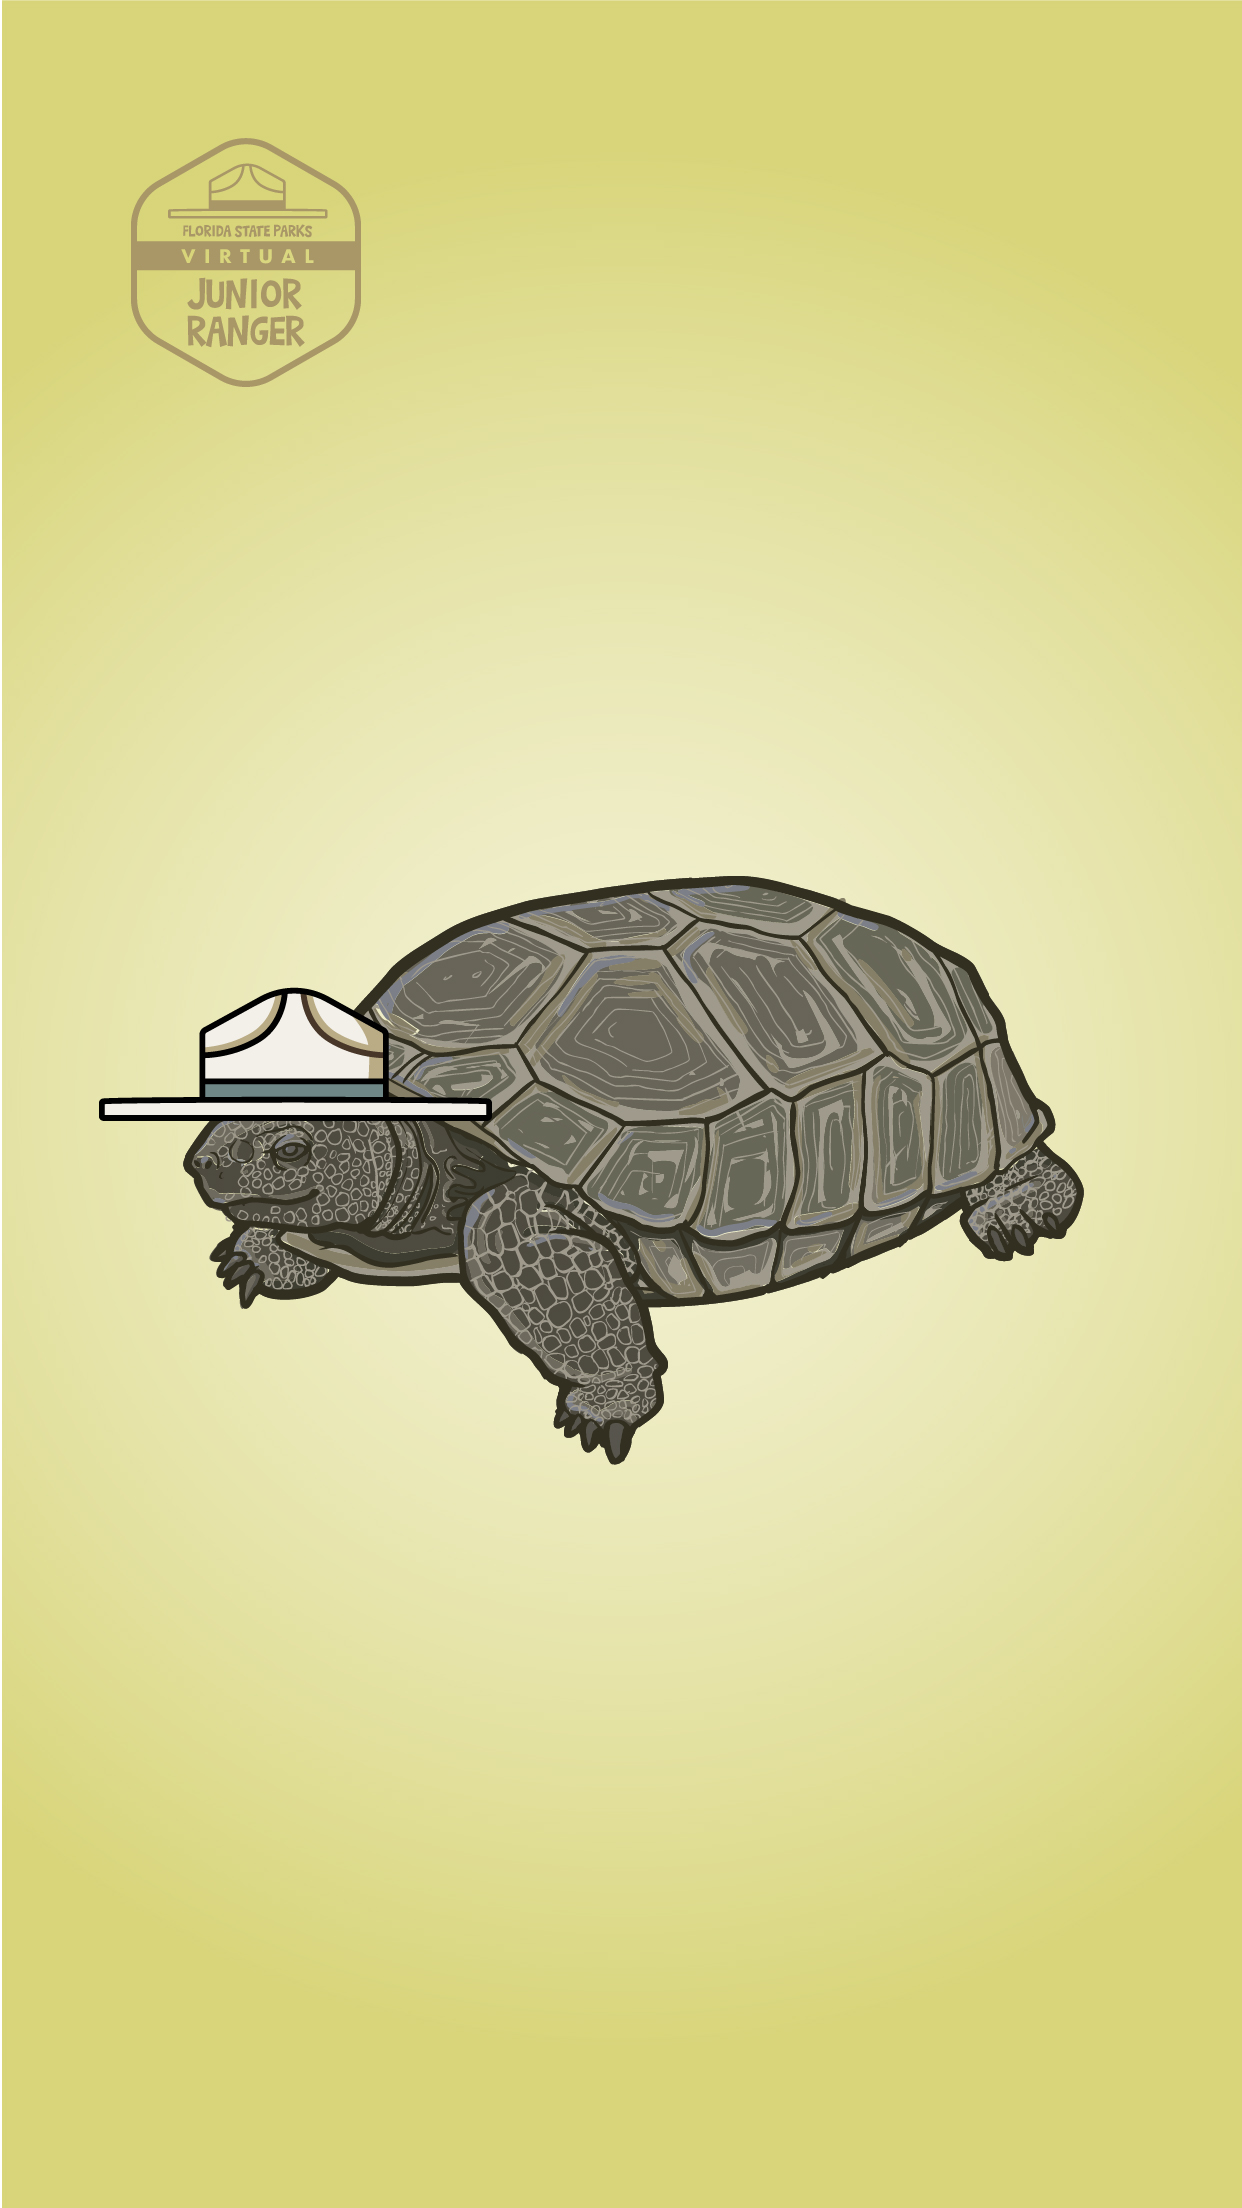 Drawing of a gopher tortoise wearing a ranger hat